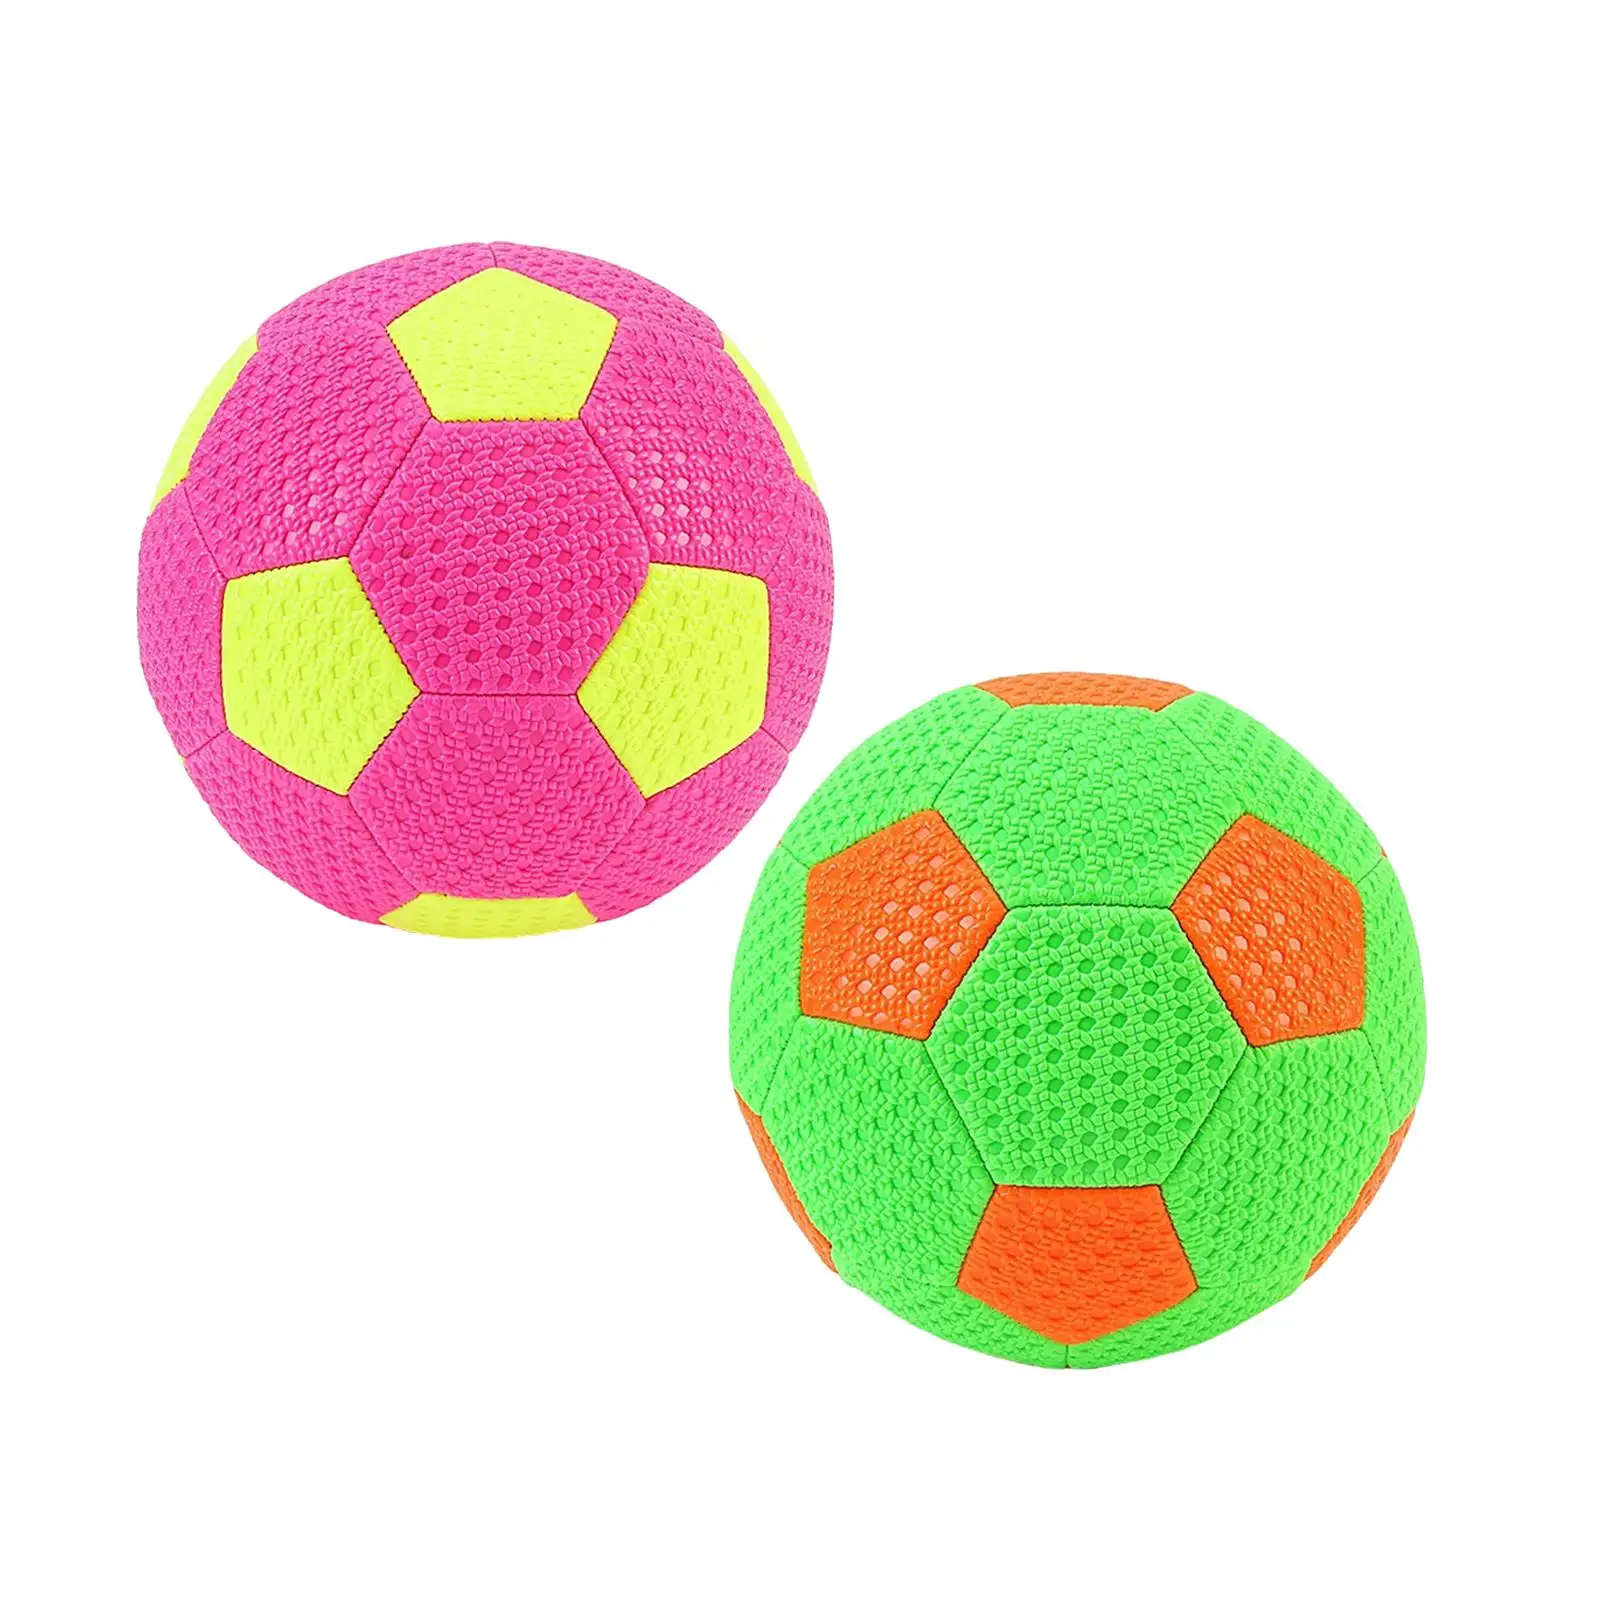 2pcs Soccer Ball Size 5 Child Toys Gift Training Ball Official Match 